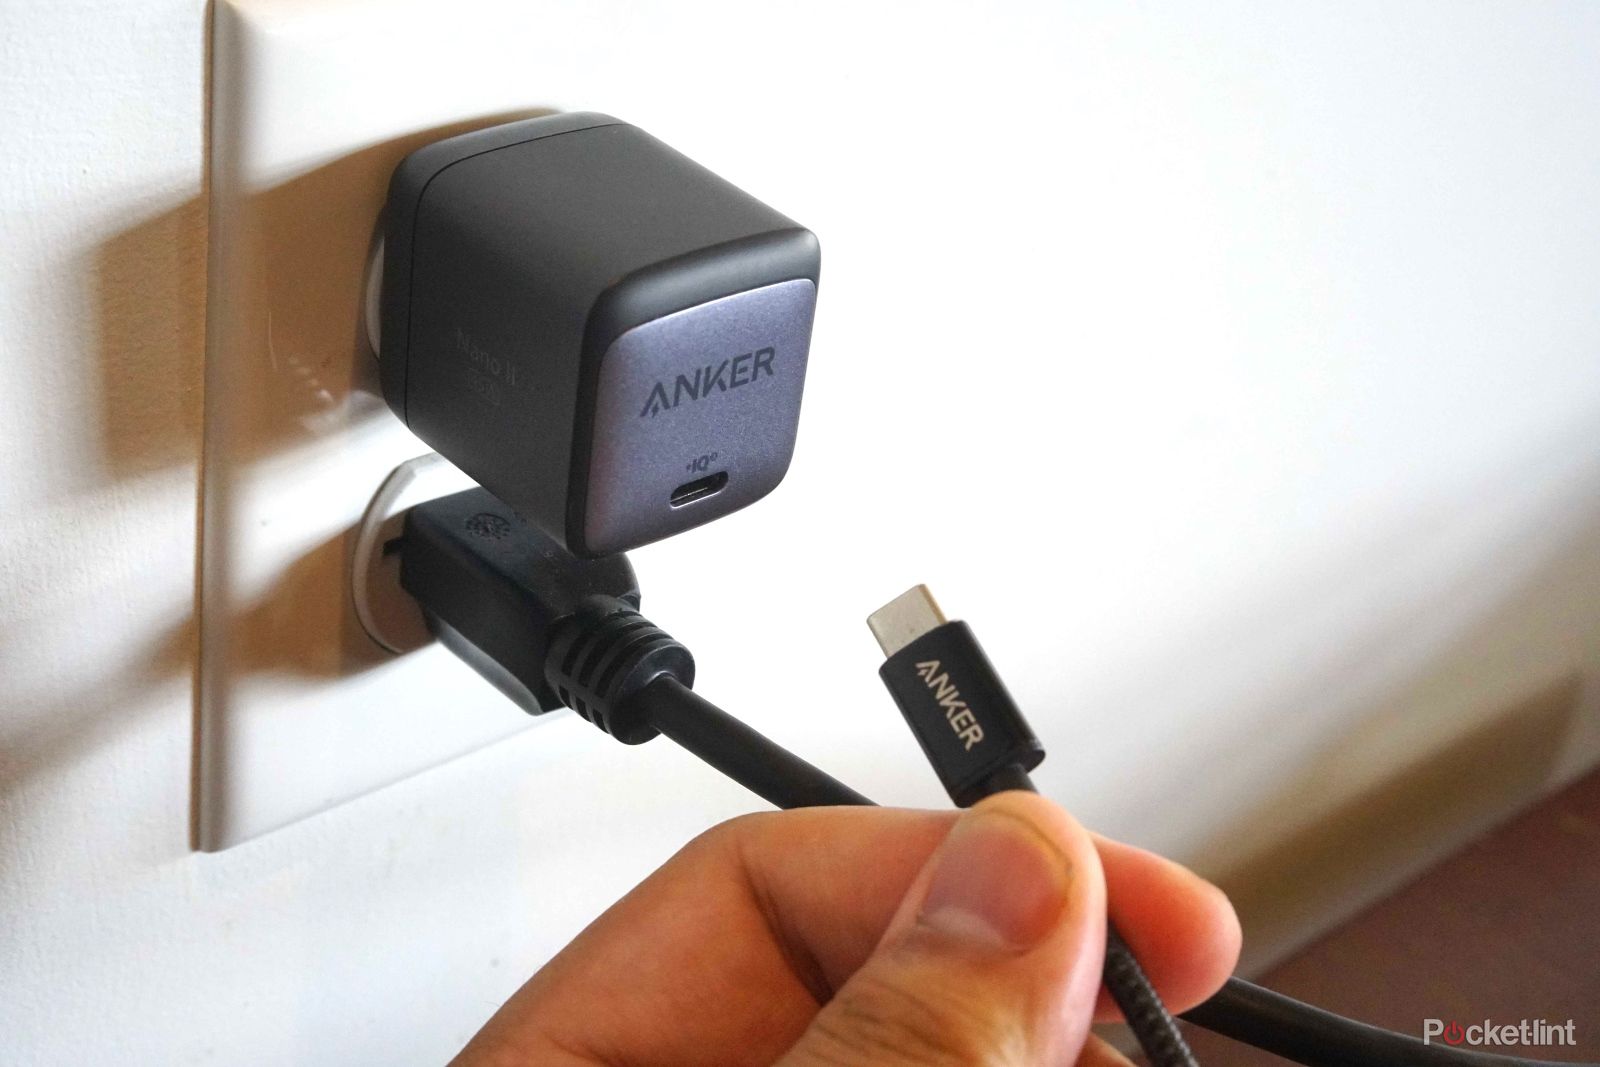 Best USB phone charger: Your new iPhone or Android needs an upgraded wall adapter